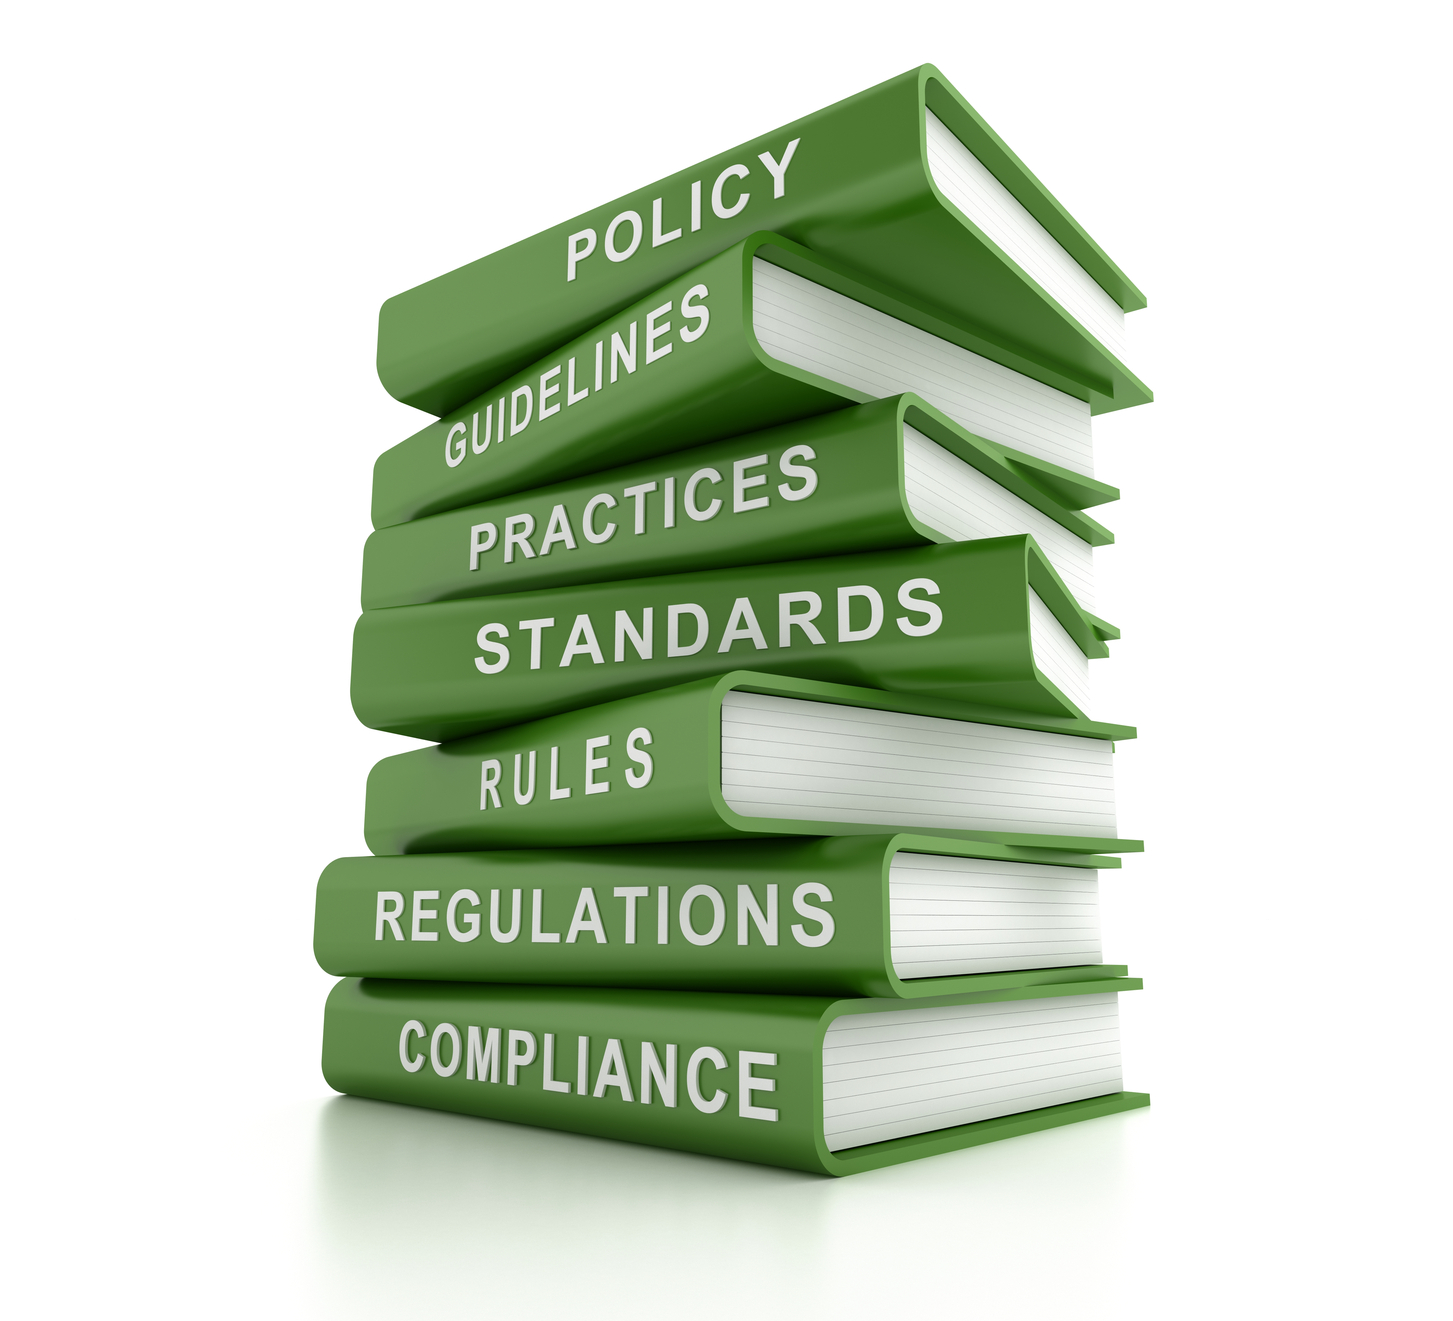 stack-of-green-compliance-and-rules-books-000035976998-medium.jpg